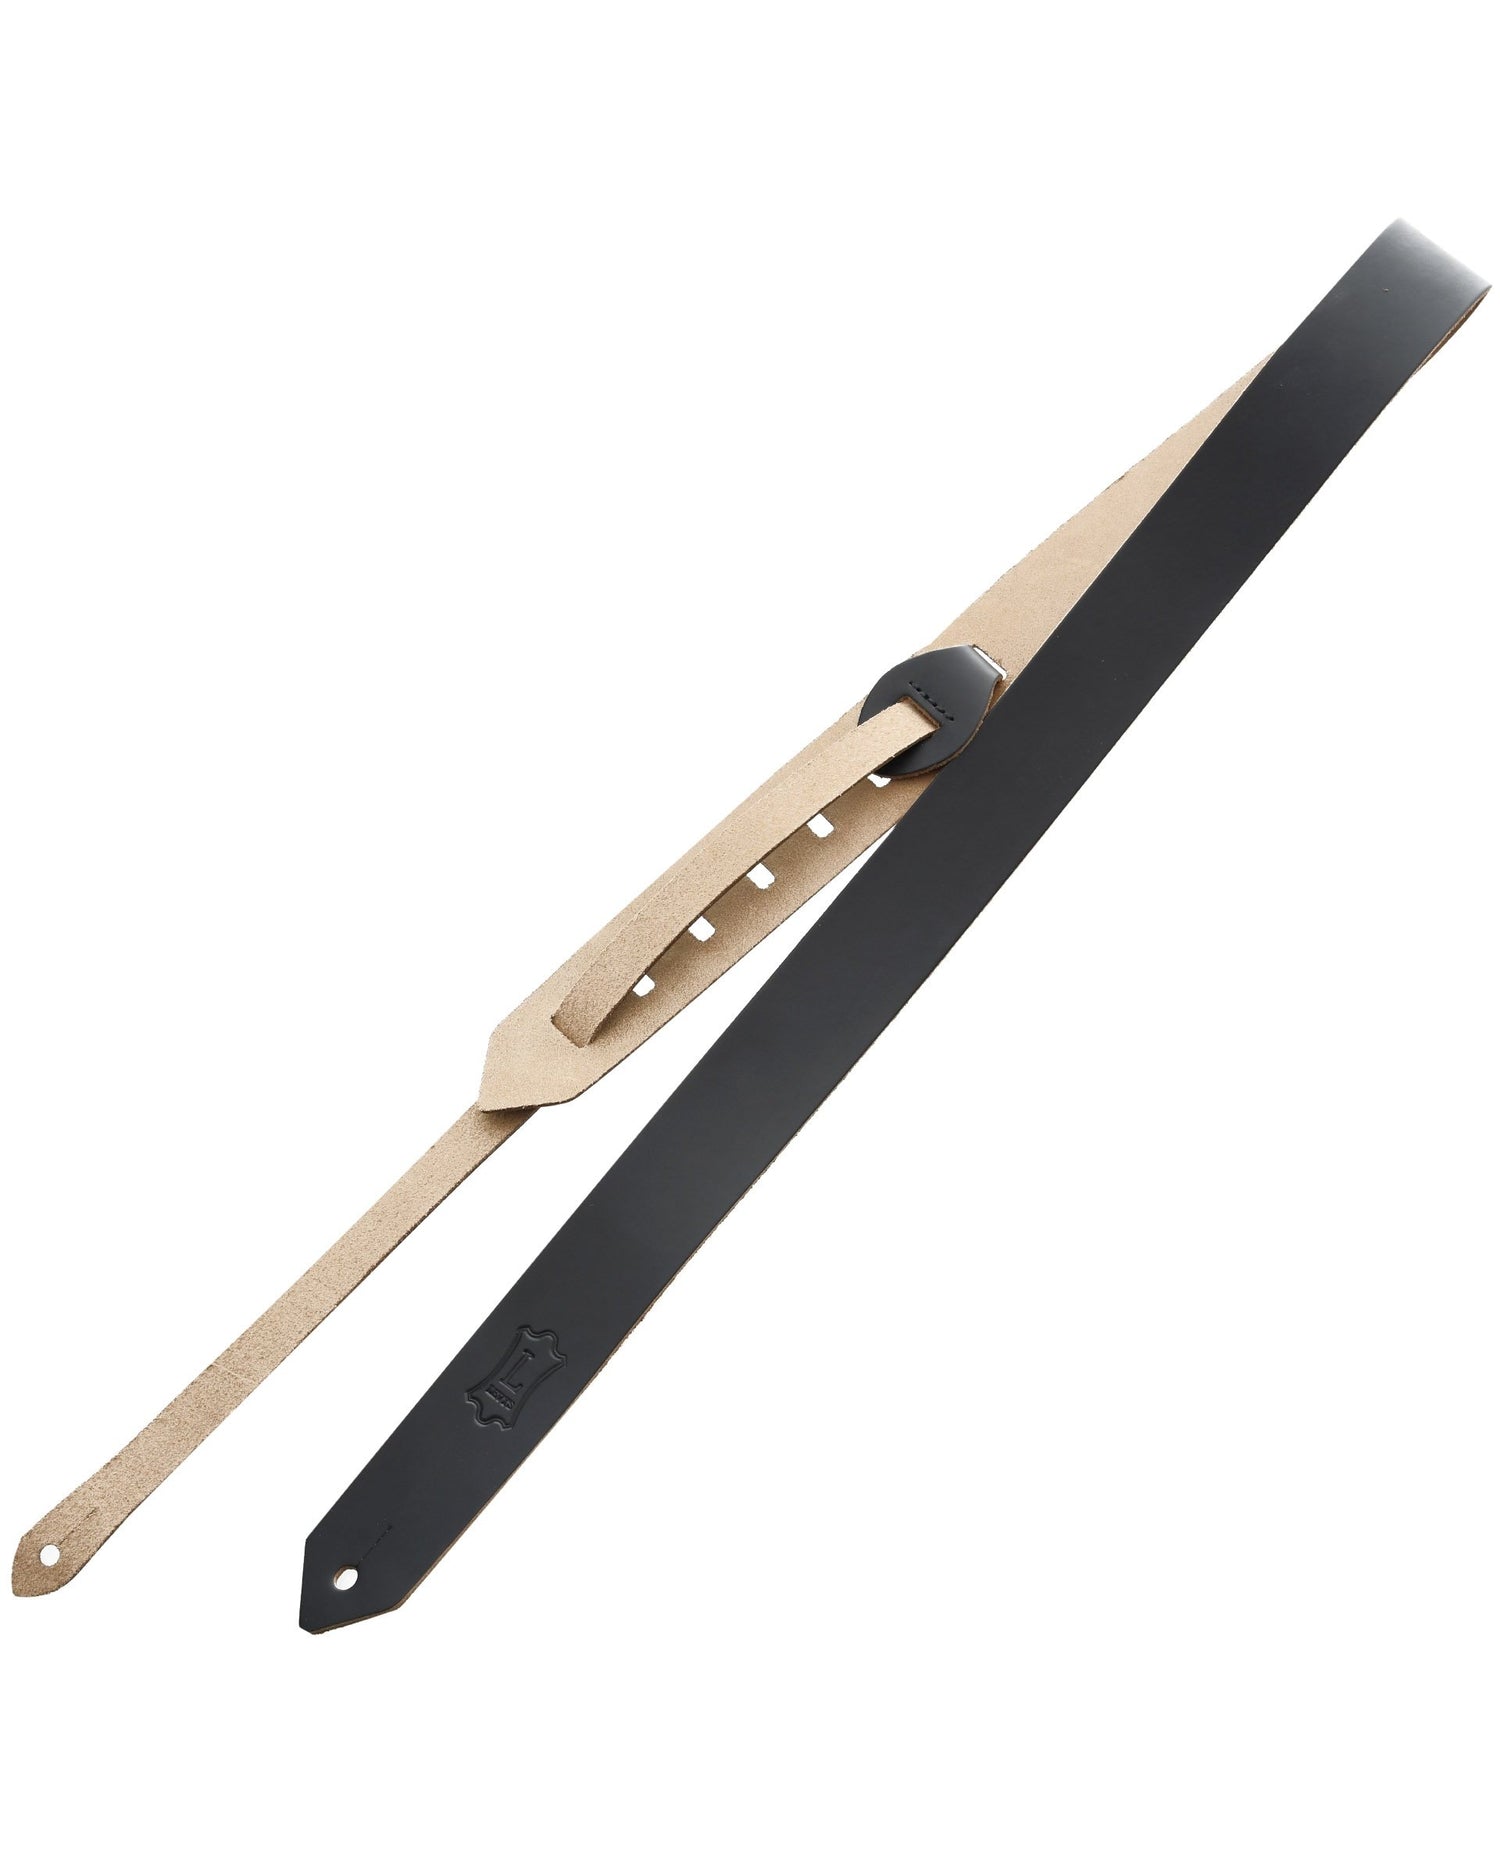 Image 1 of Levy Narrow Leather Guitar Strap - SKU# M70-BLK : Product Type Accessories & Parts : Elderly Instruments